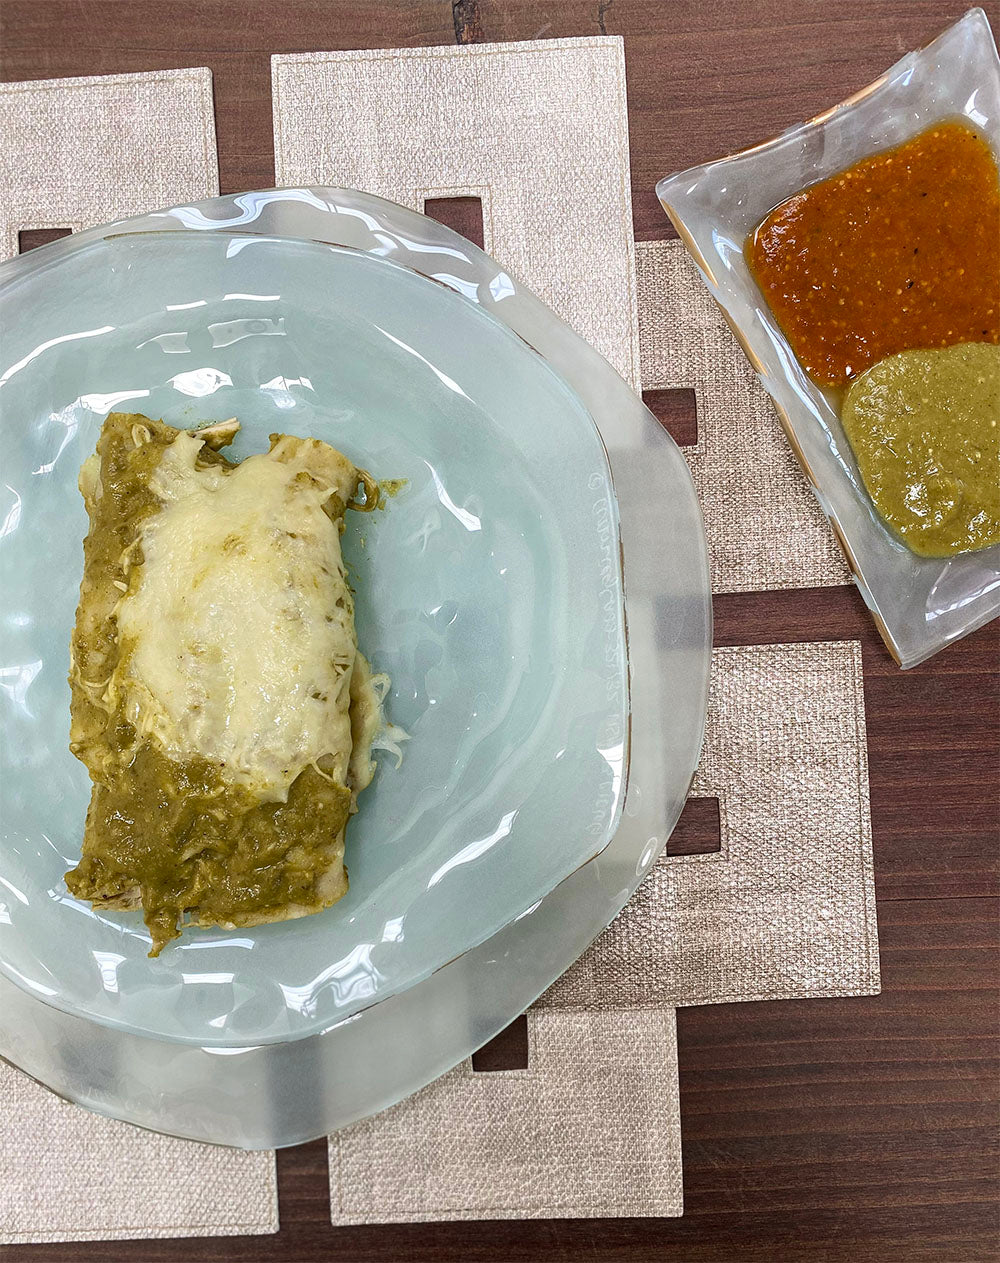 Green Chicken Enchilada on the Annieglass frosted glass dinner plates